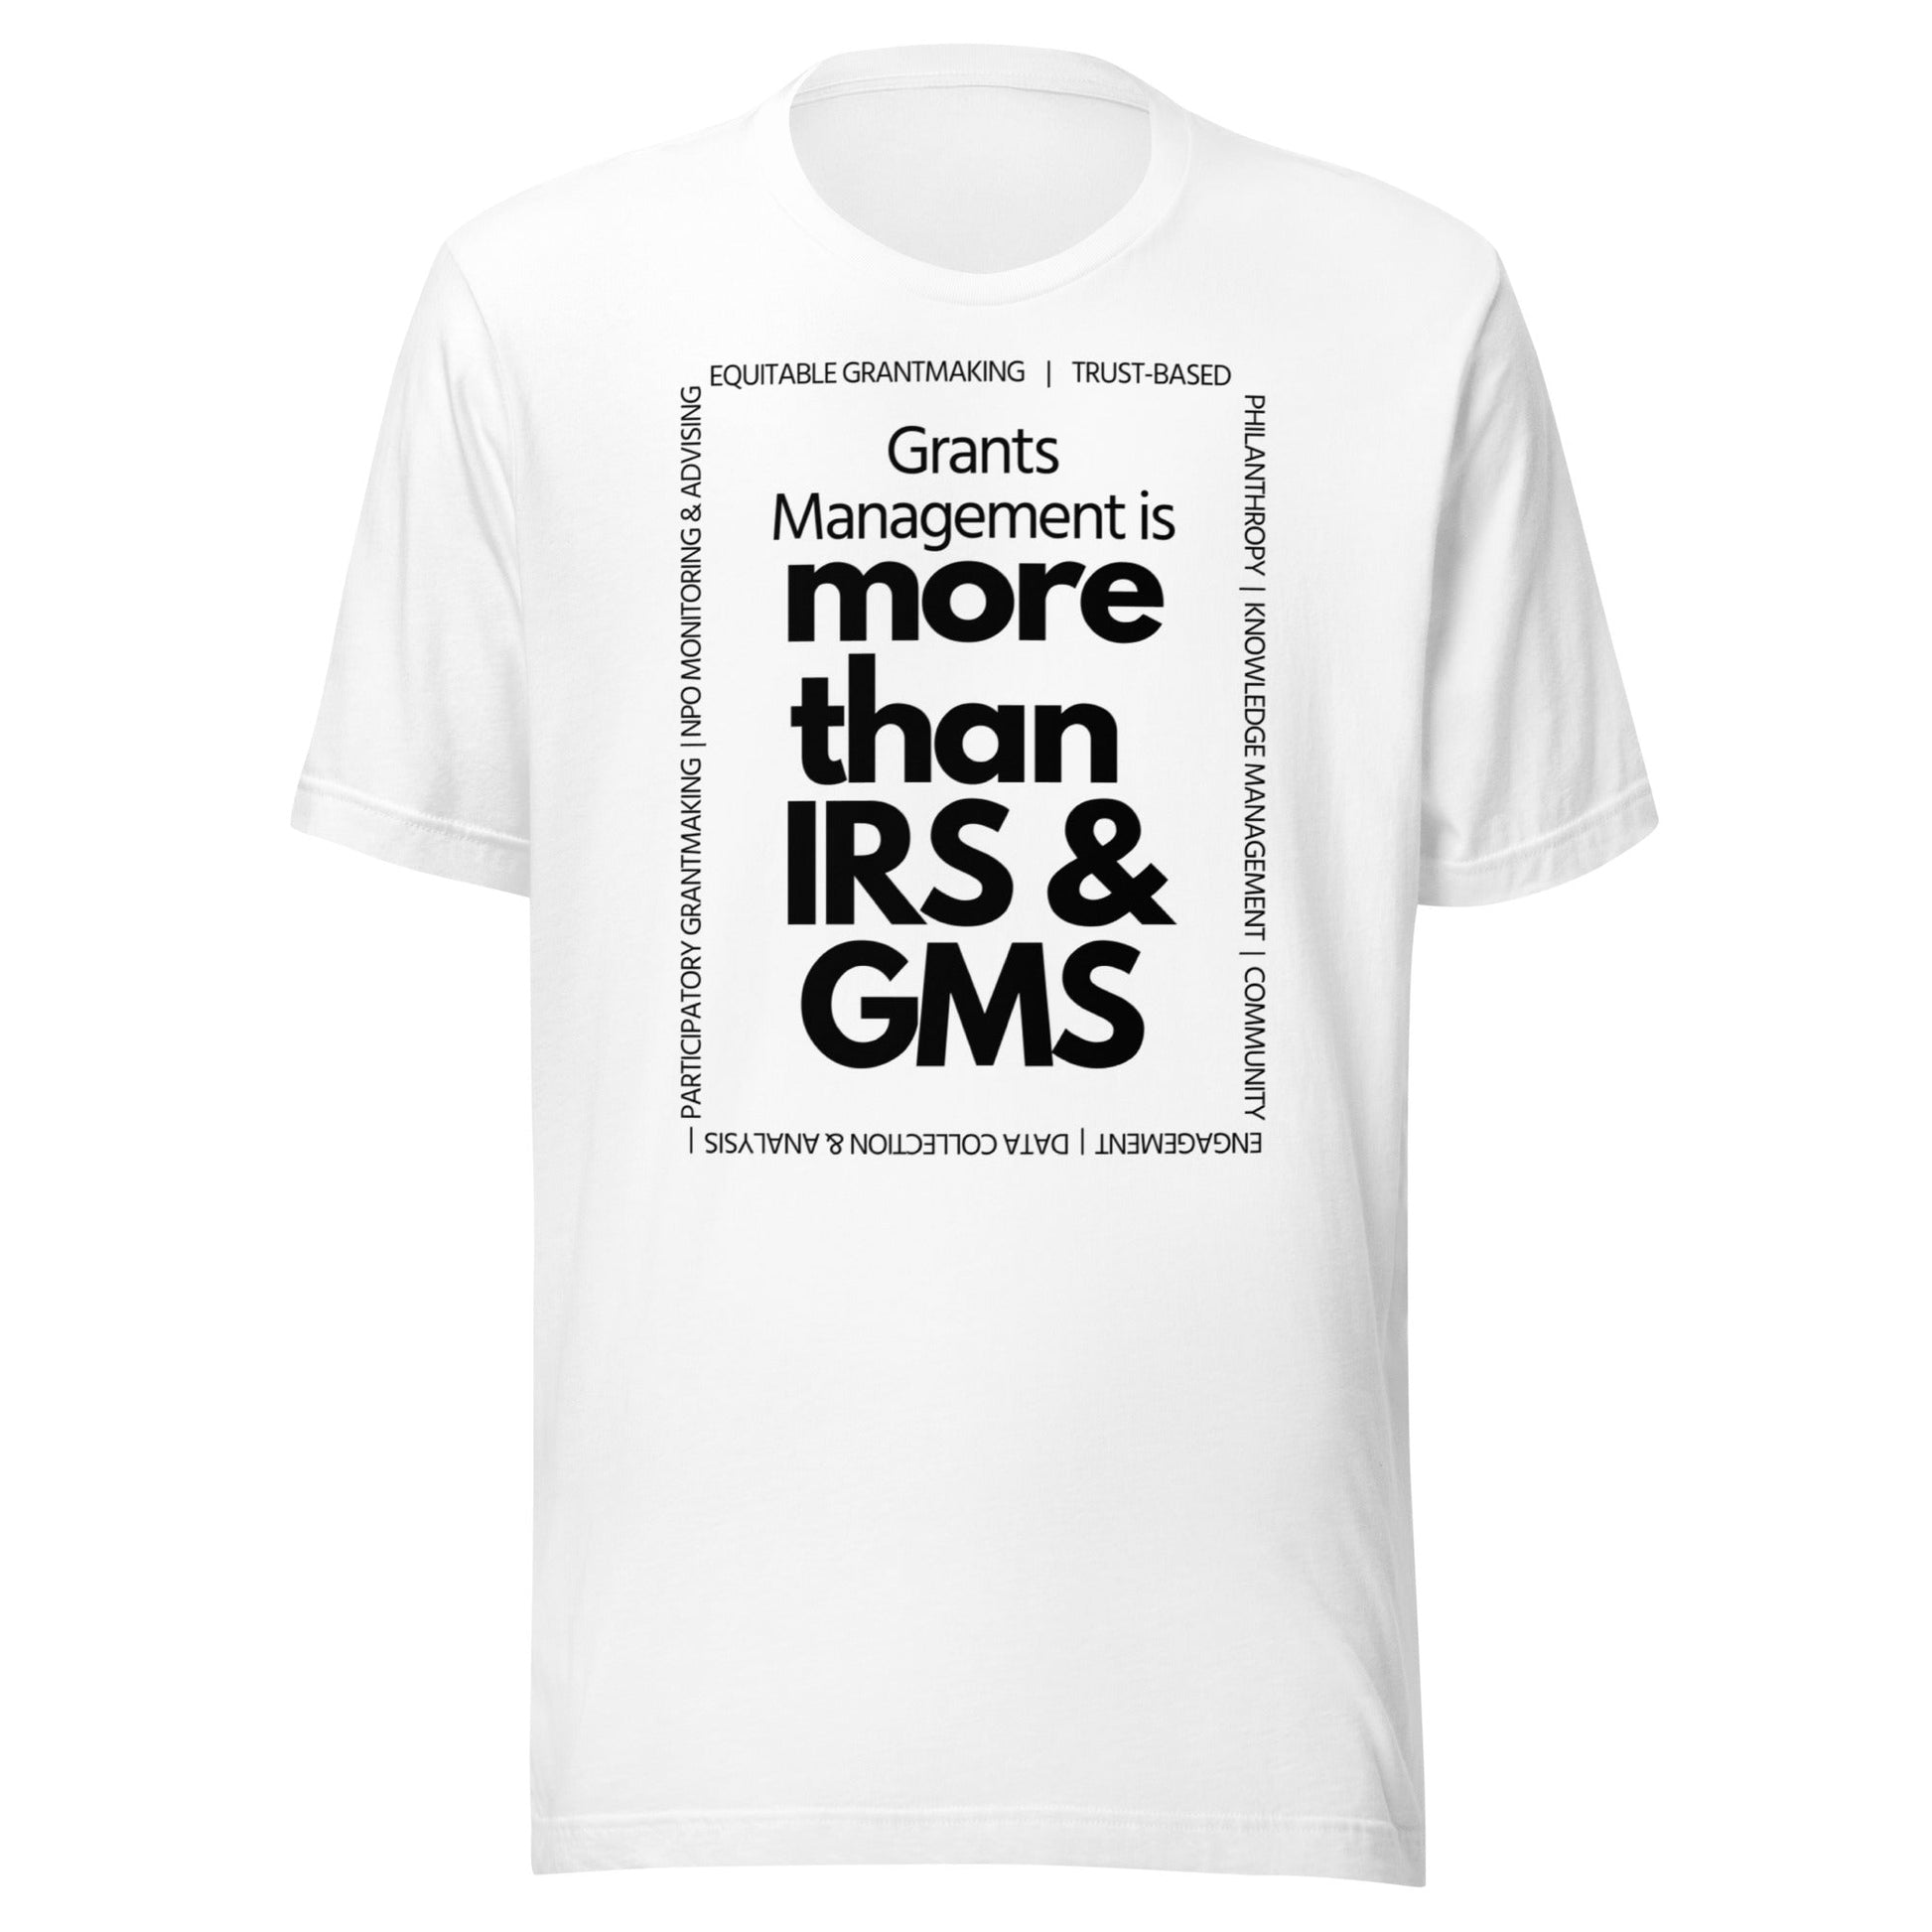 Grants Management is more than IRS & GMS - Light Unisex t-shirt-recalciGrant